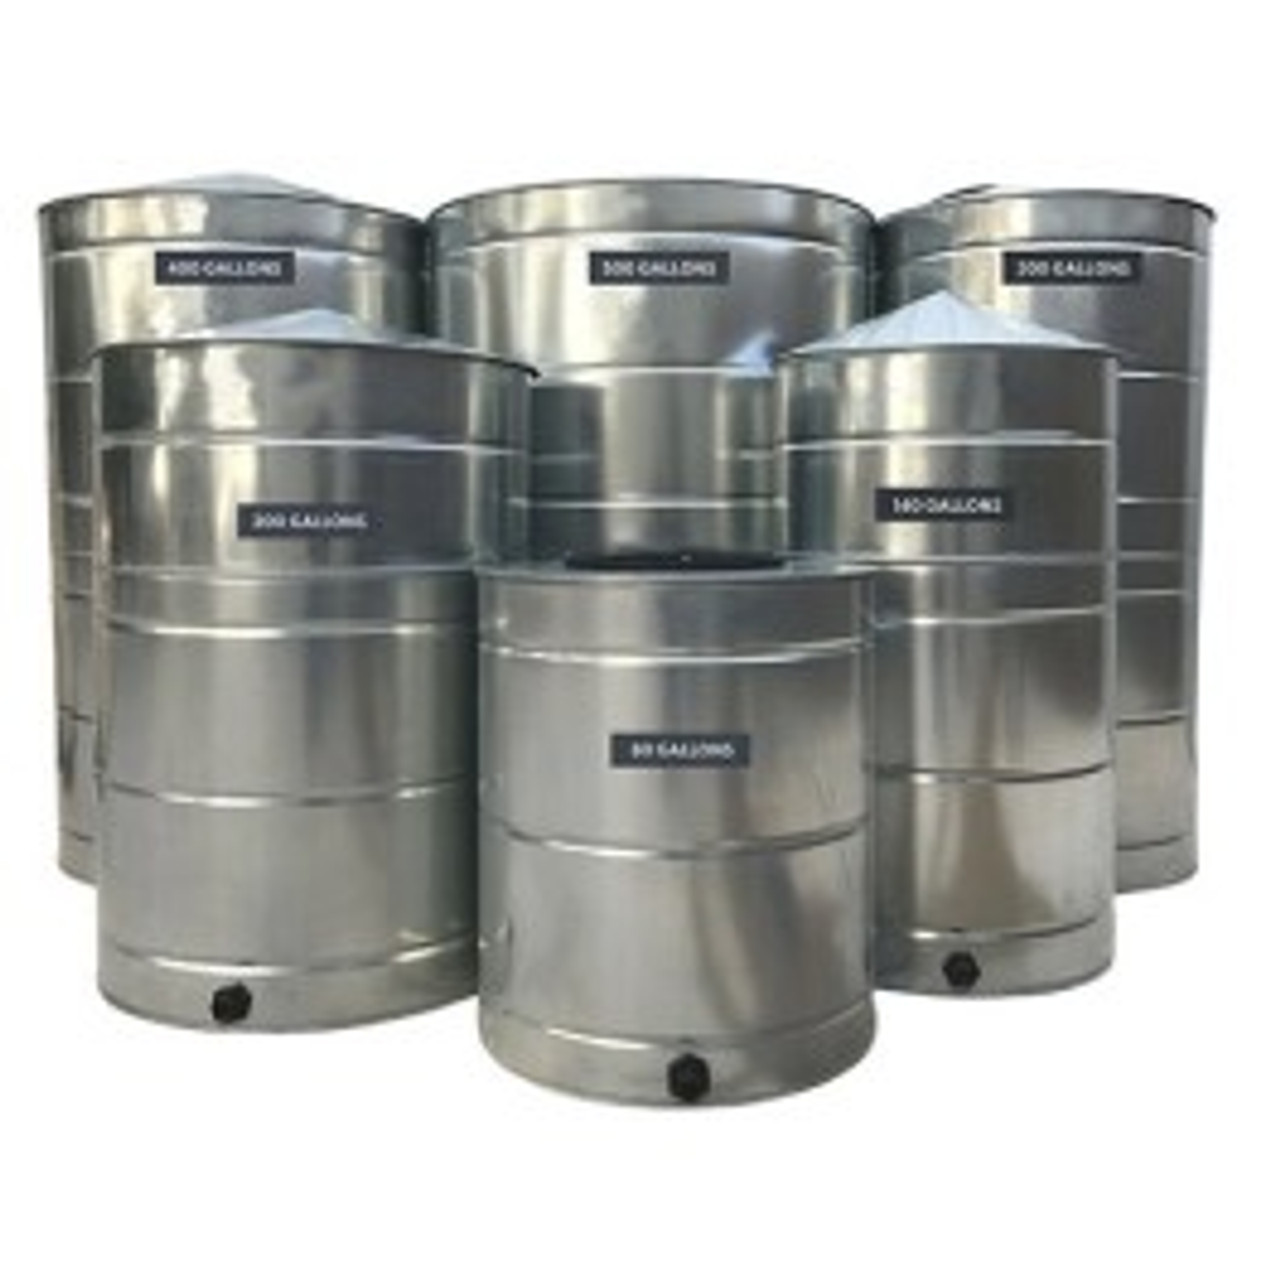 An image of a 830 Gallon Texas Metal Tanks Galvanized Vertical Water Tank | WT830G